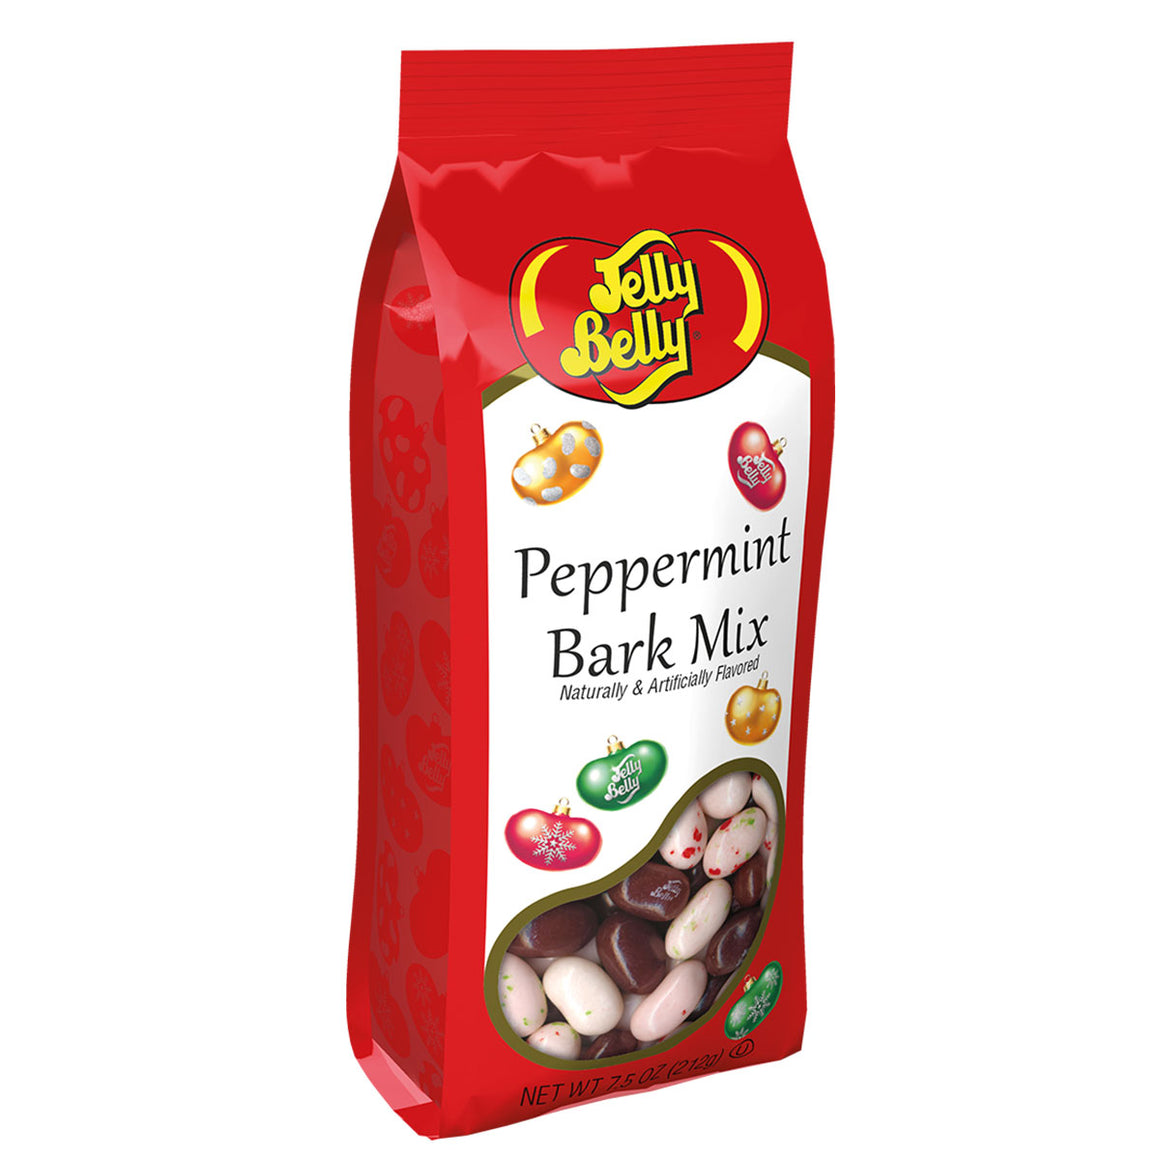 All City Candy Jelly Belly Peppermint Bark 7.5 oz. Gift Bag Jelly Belly For fresh candy and great service, visit www.allcitycandy.com